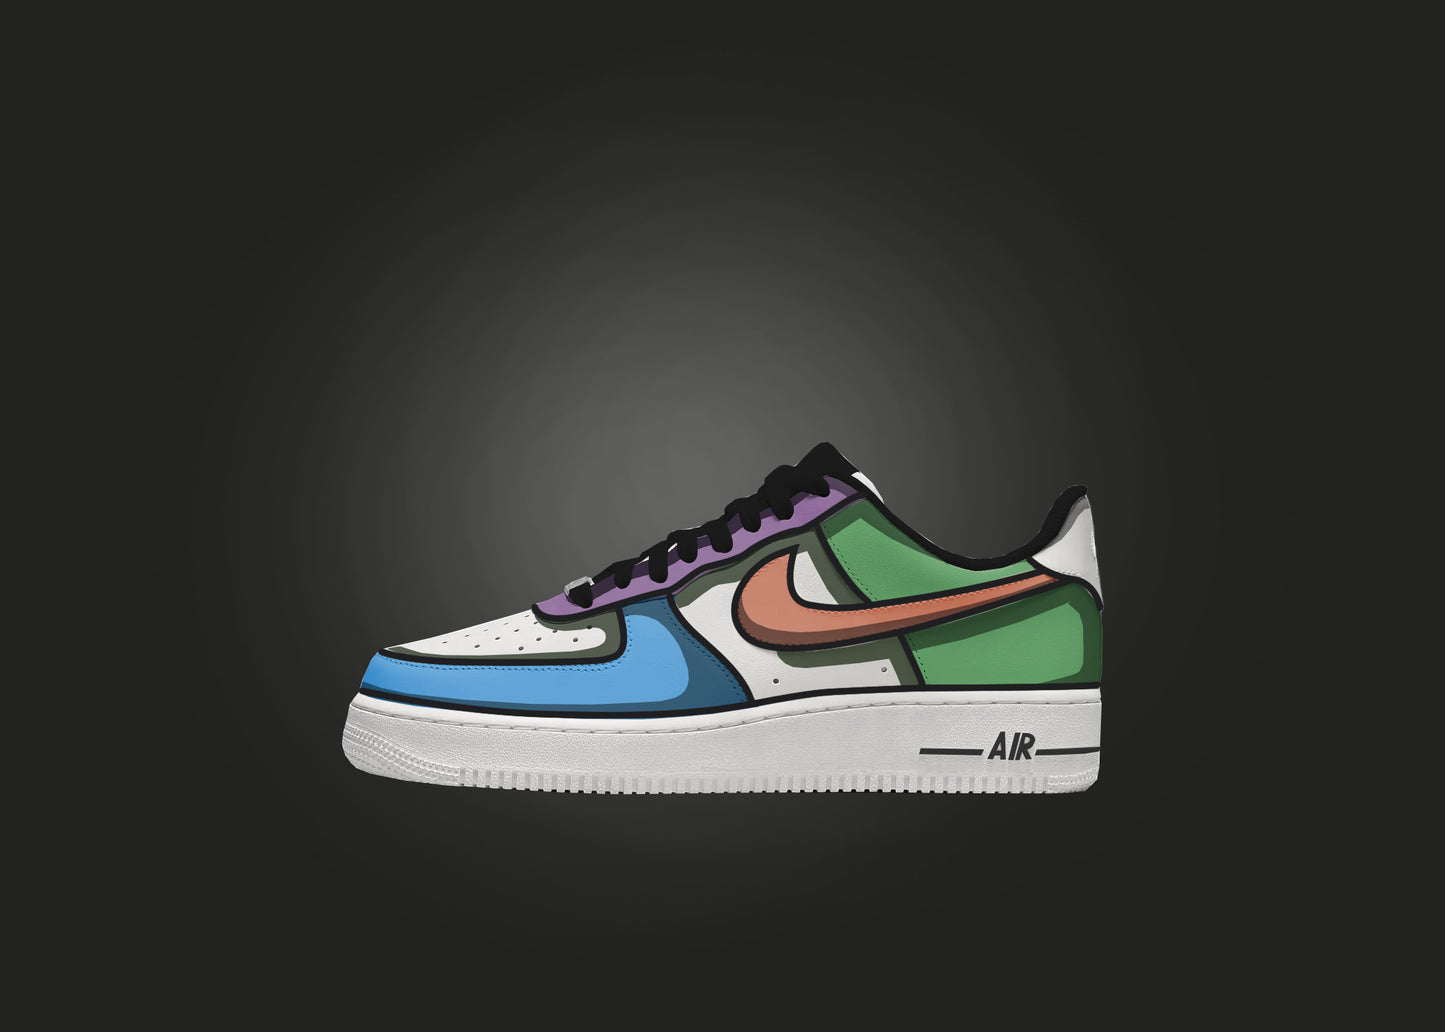 Custom Air Force 1 sneaker featuring individual panels of blue, purple, orange, and green, displayed against a black background.